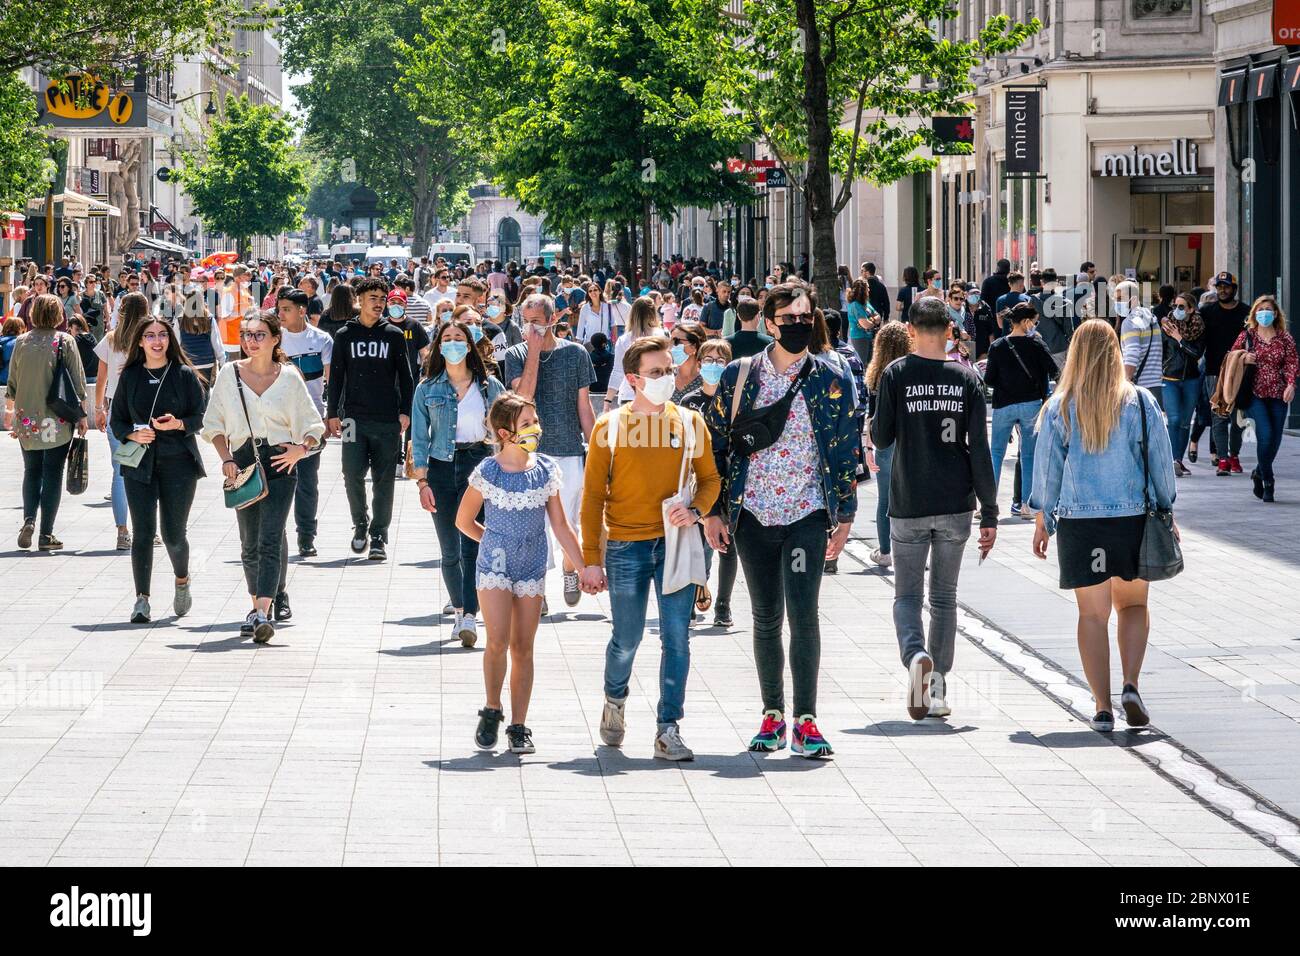 Lyon France, 16 May 2020 : People wearing face masks on the first weekend of the unlockdown in Lyon France Stock Photo